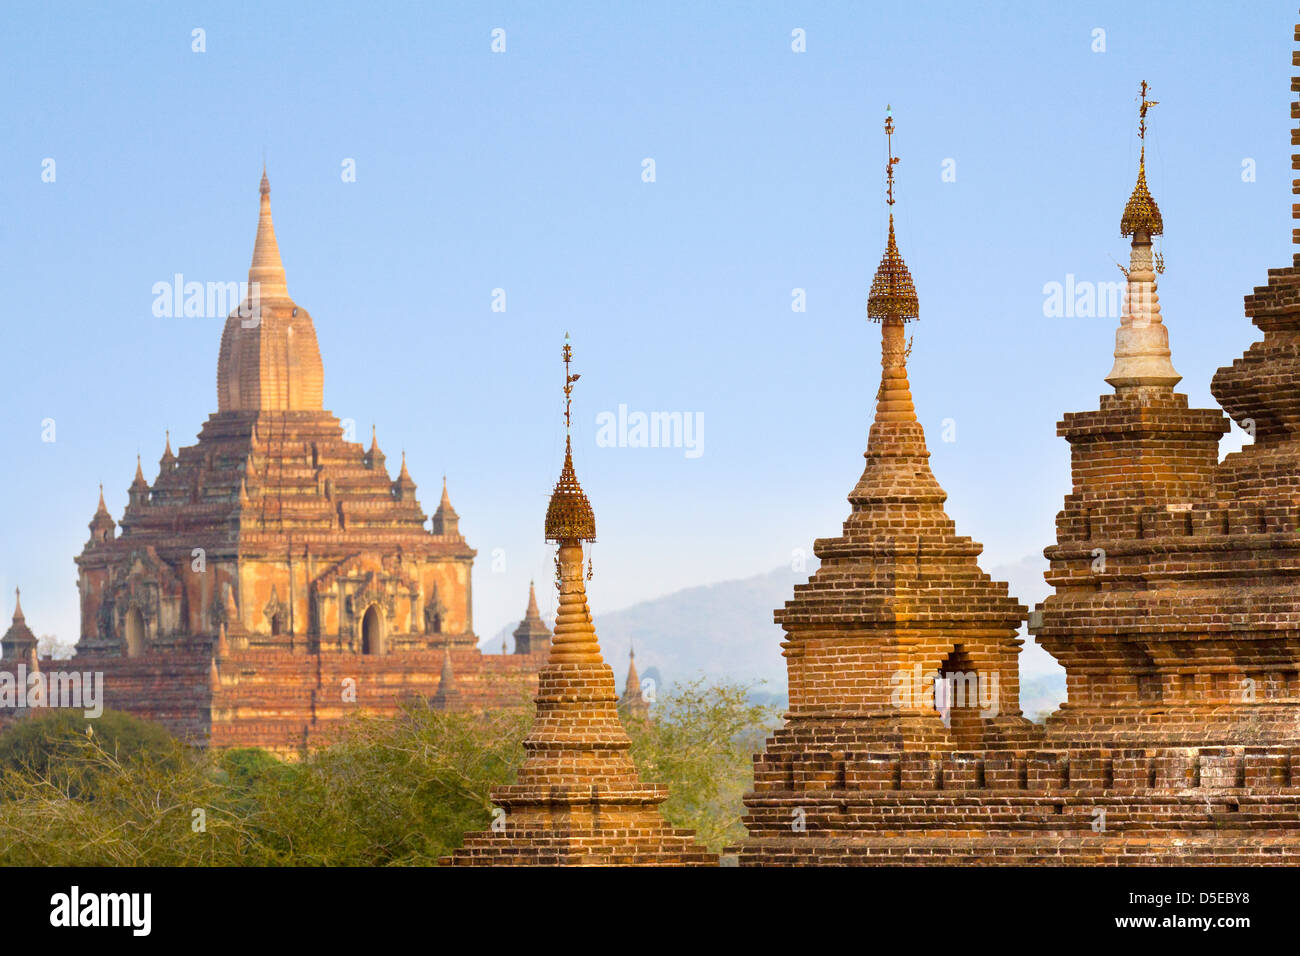 The Temples and Pagodas of Bagan, Myanmar - early morning 17 Stock Photo